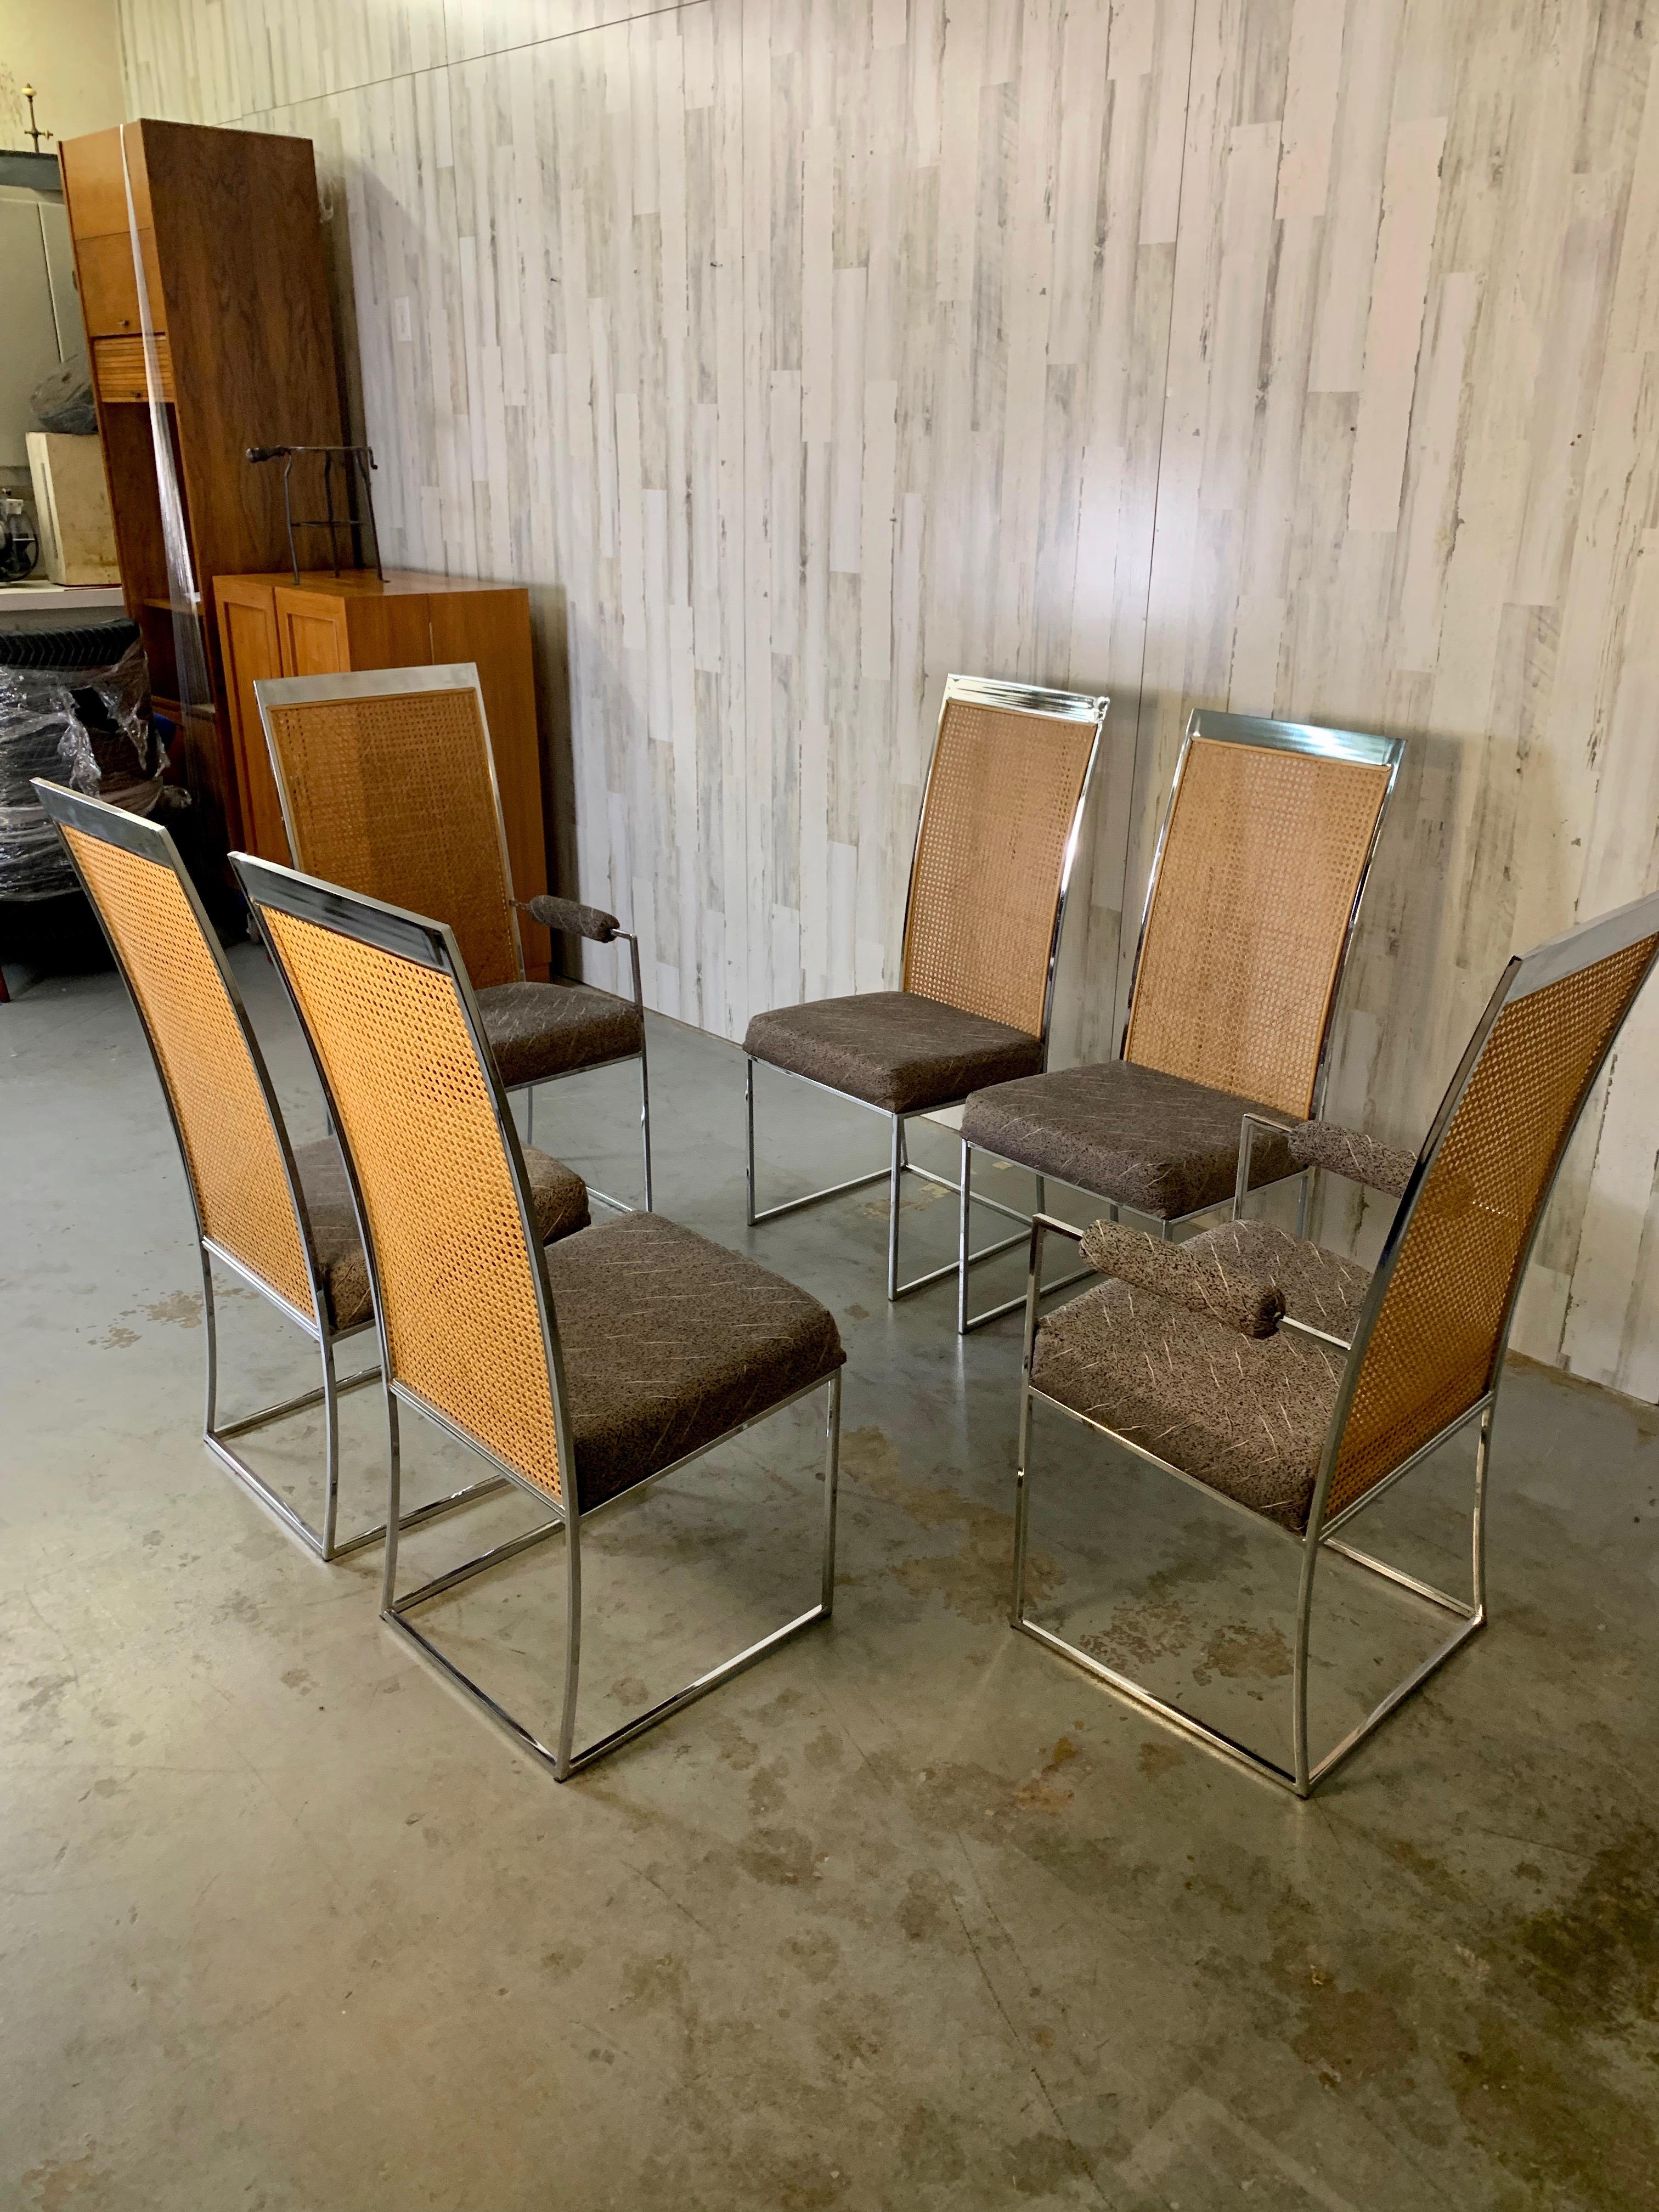 Chrome high back dining chairs with cane back and original upholstery.
Deigned by Milo Baughman and manufactured by Thayer Coggin. 
The fabric is very clean or new upholstery may be desired. 

Measures: Arm chair 21.5 